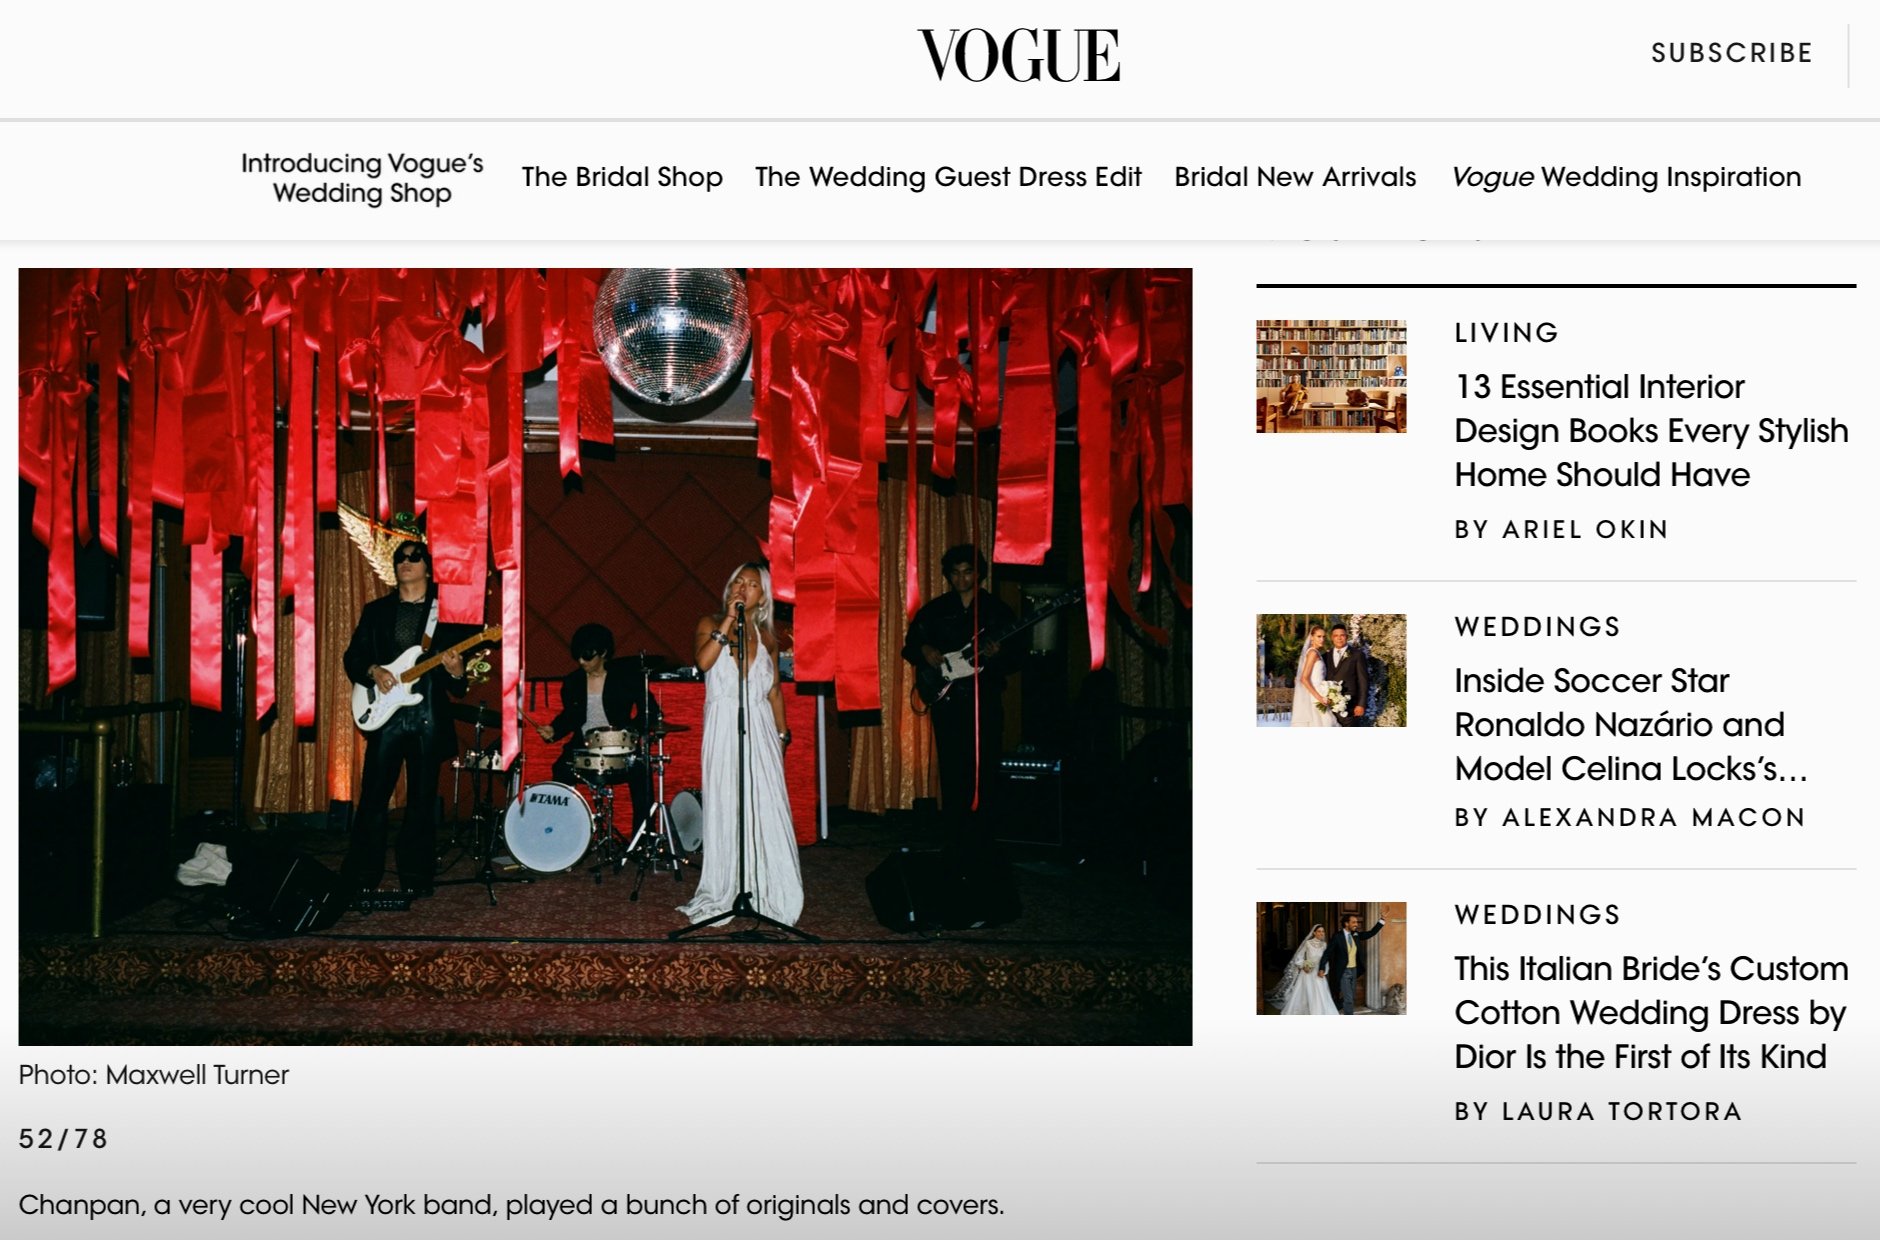 Chanpan featured on Vogue